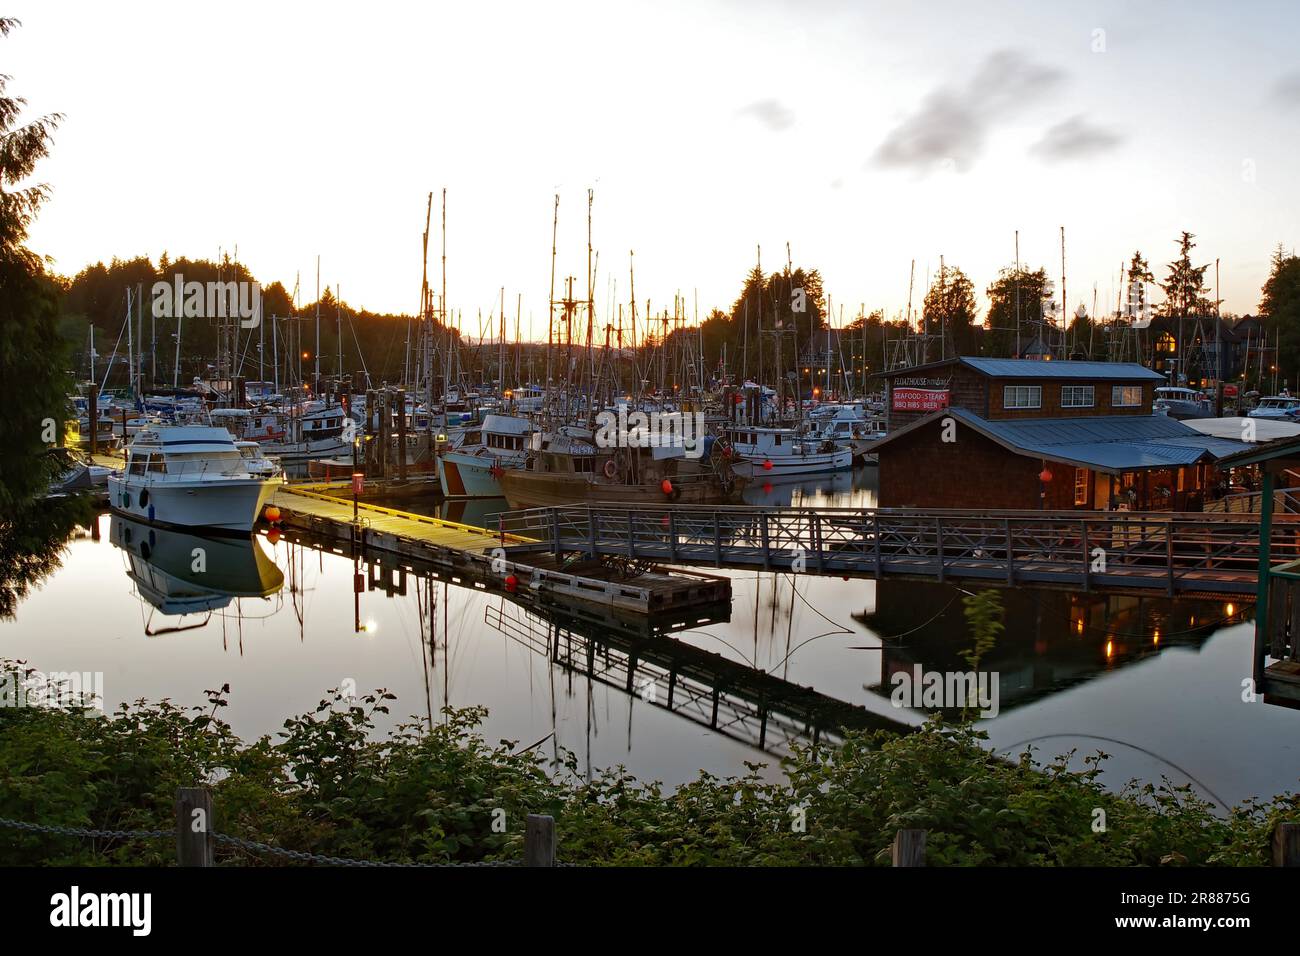 Evening atmosphere in a small harbour, illuminated houseboat and jetties, Ucluelet, Pacific, Vancouver Isalnd, British Columbia, Canada Stock Photo